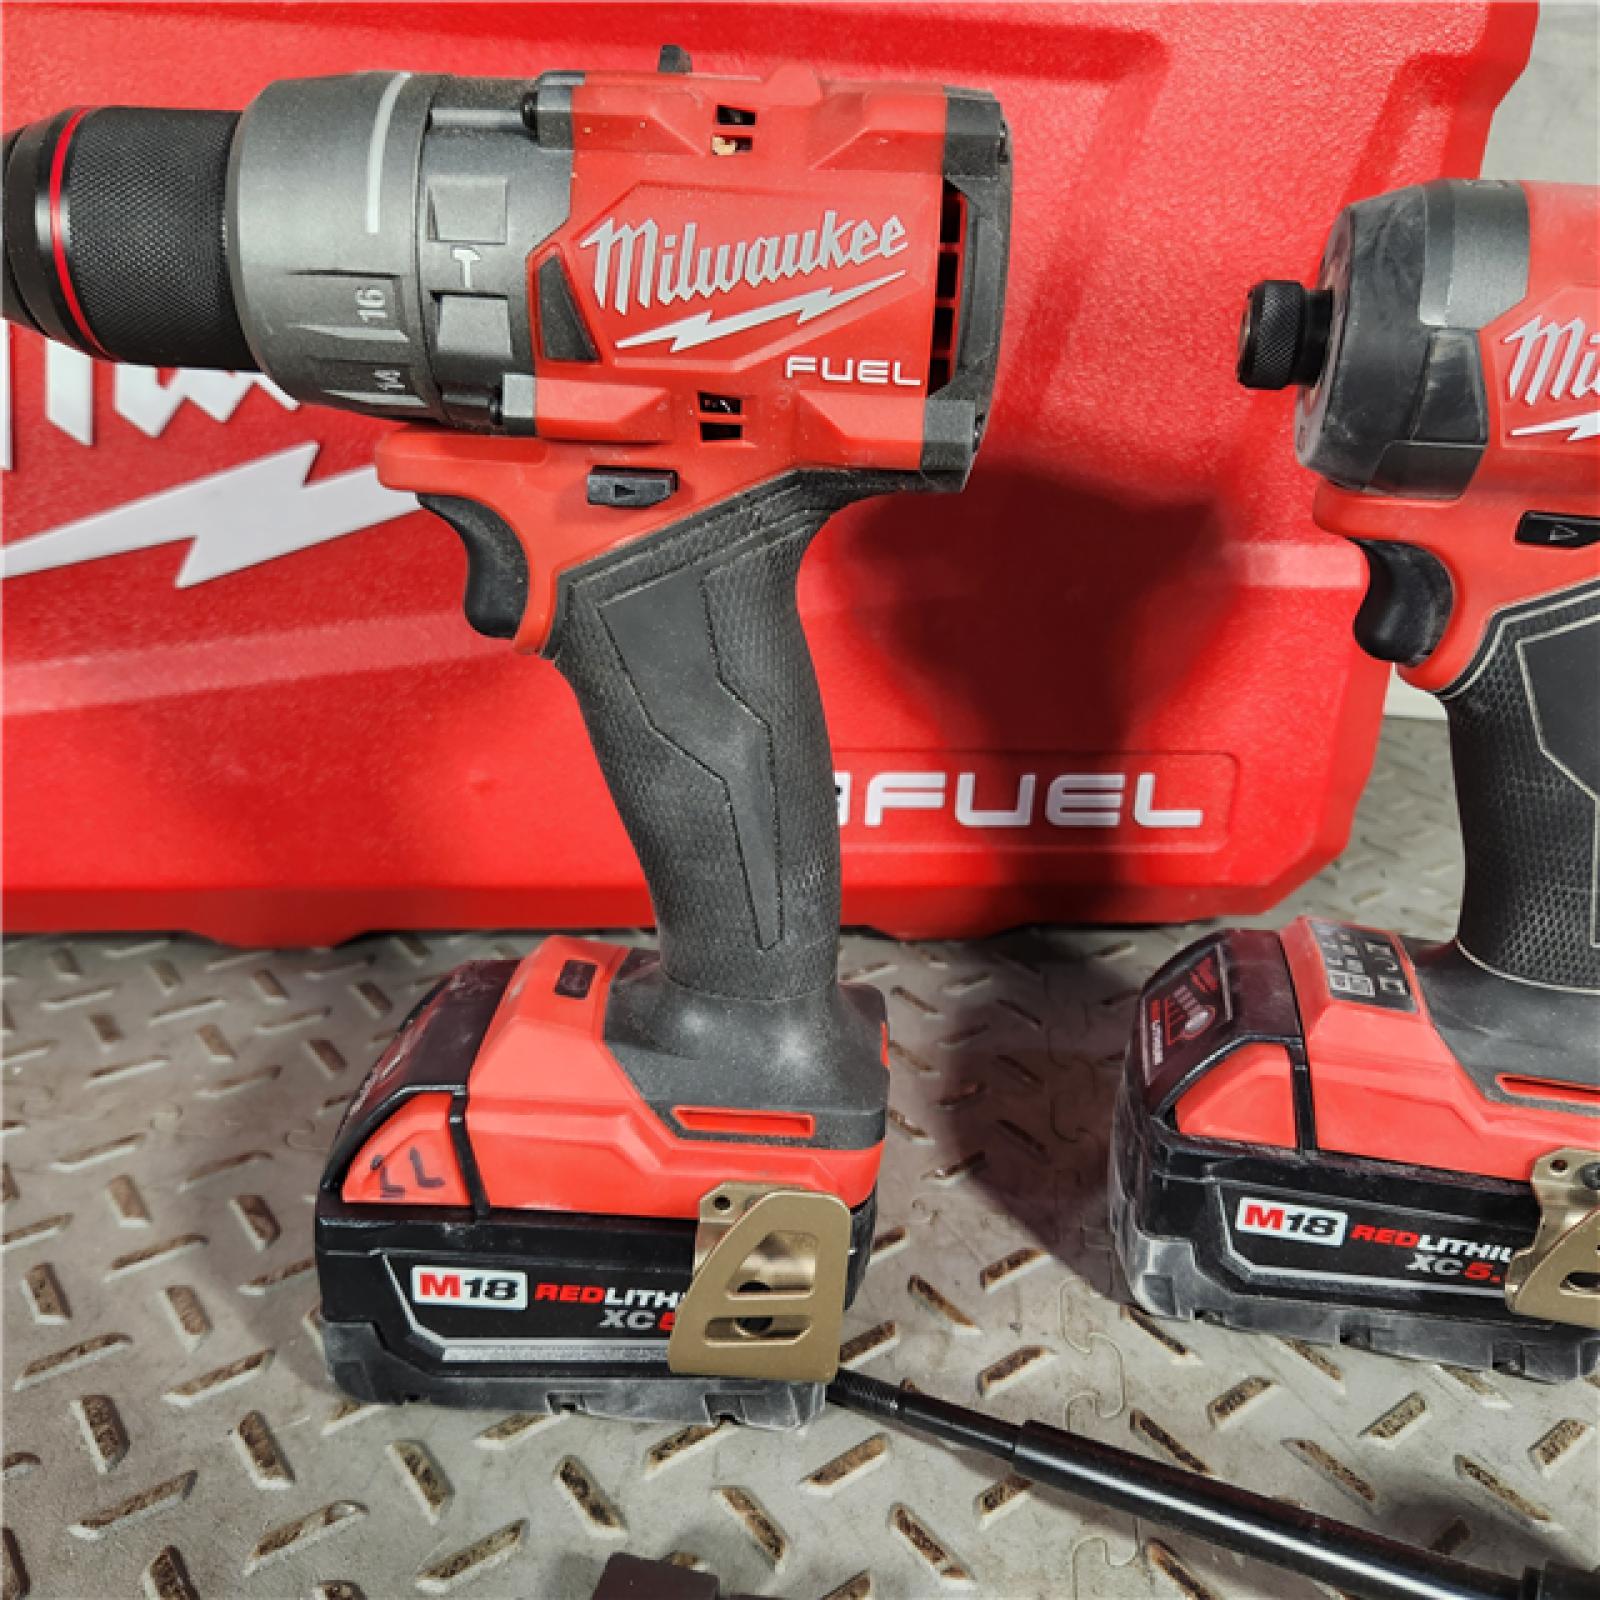 Houston location- AS-IS Milwaukee M18 Compact Brushless 2-Tool Combo Kit